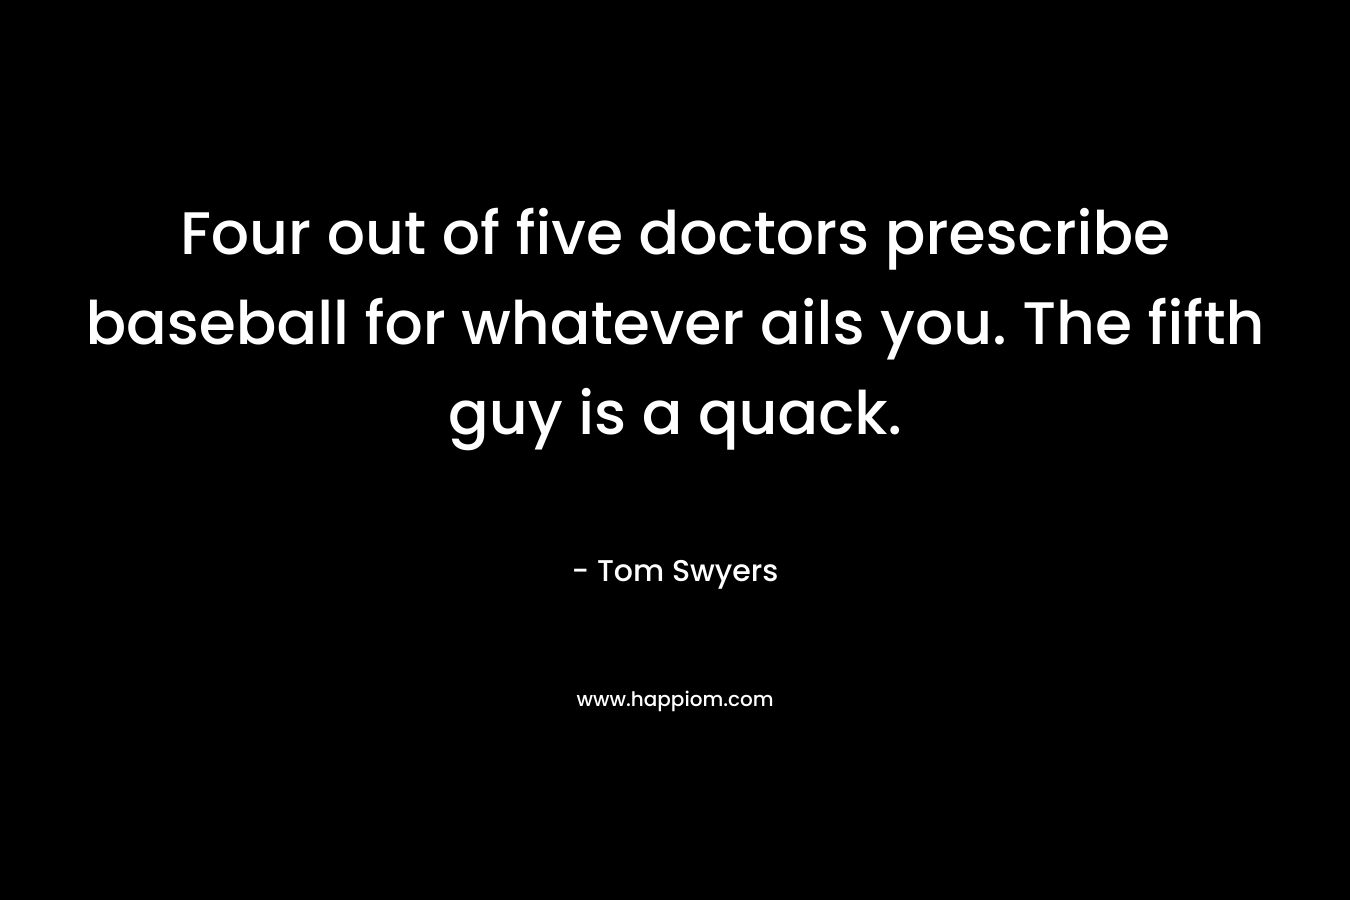 Four out of five doctors prescribe baseball for whatever ails you. The fifth guy is a quack. – Tom Swyers